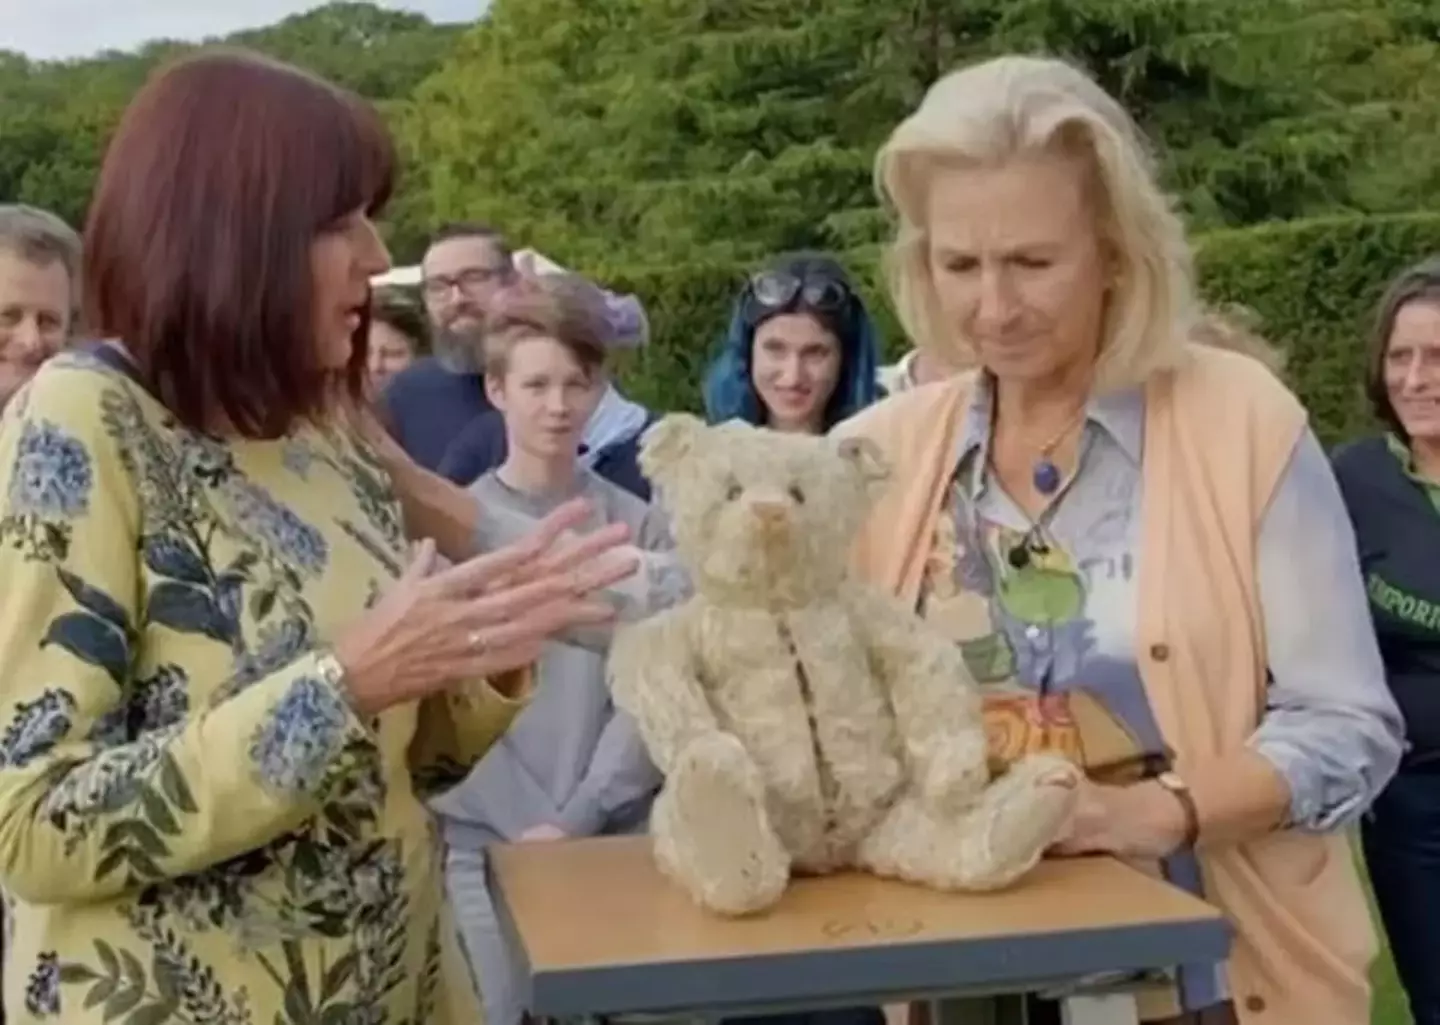 Bunny Campione valued the teddy bear at a whopping £15,000.